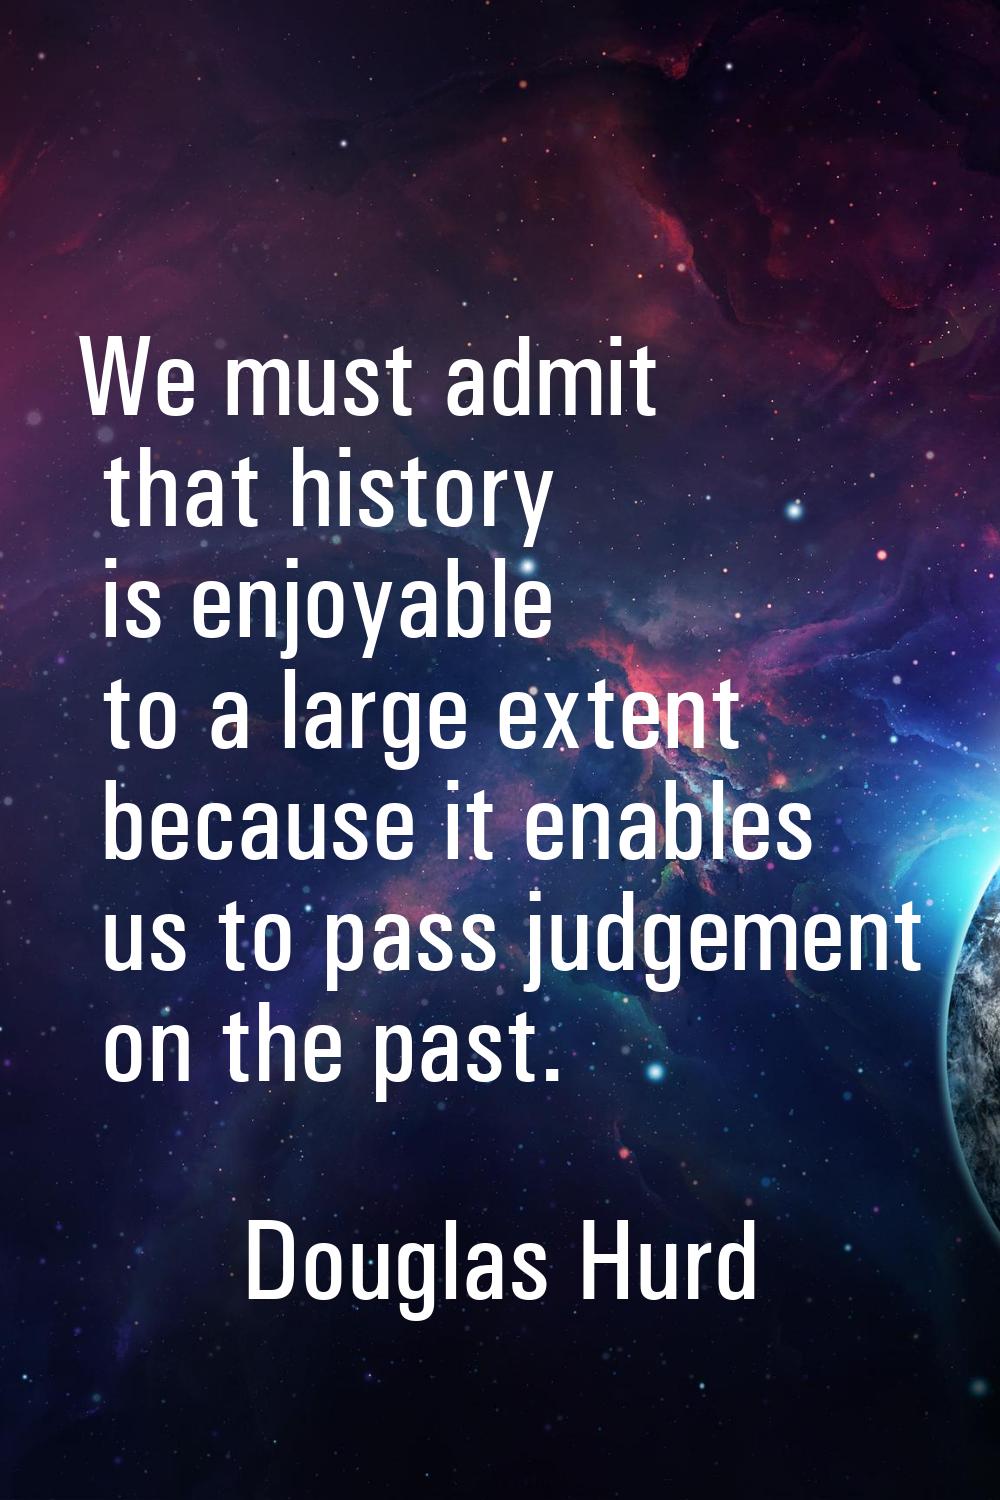 We must admit that history is enjoyable to a large extent because it enables us to pass judgement o